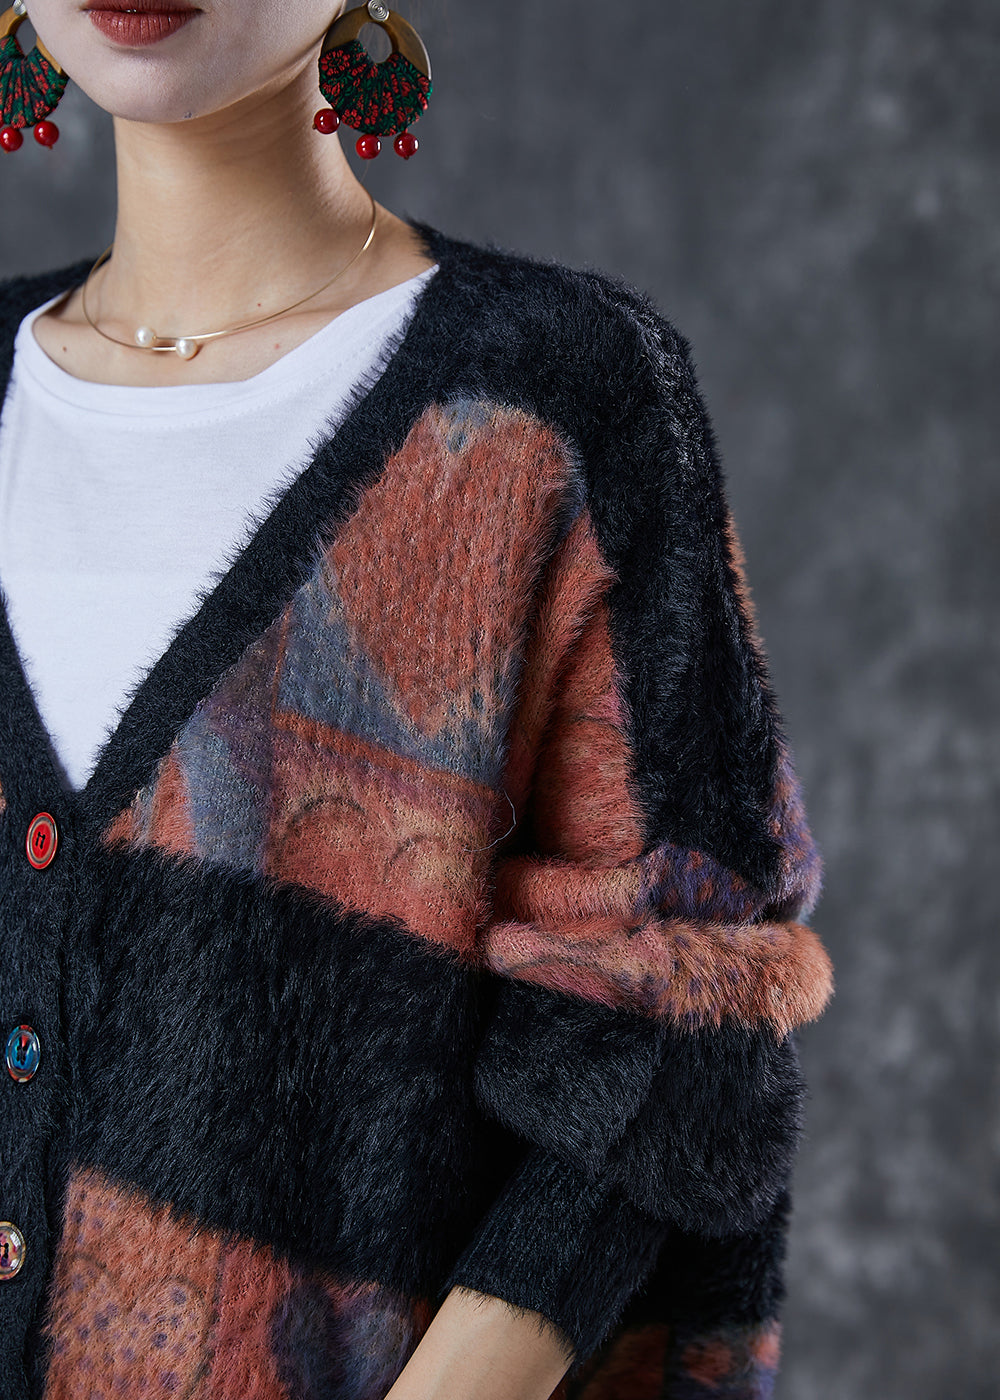 Modern Colorblock Oversized Thick Mink Hair Knitted Cardigan Winter